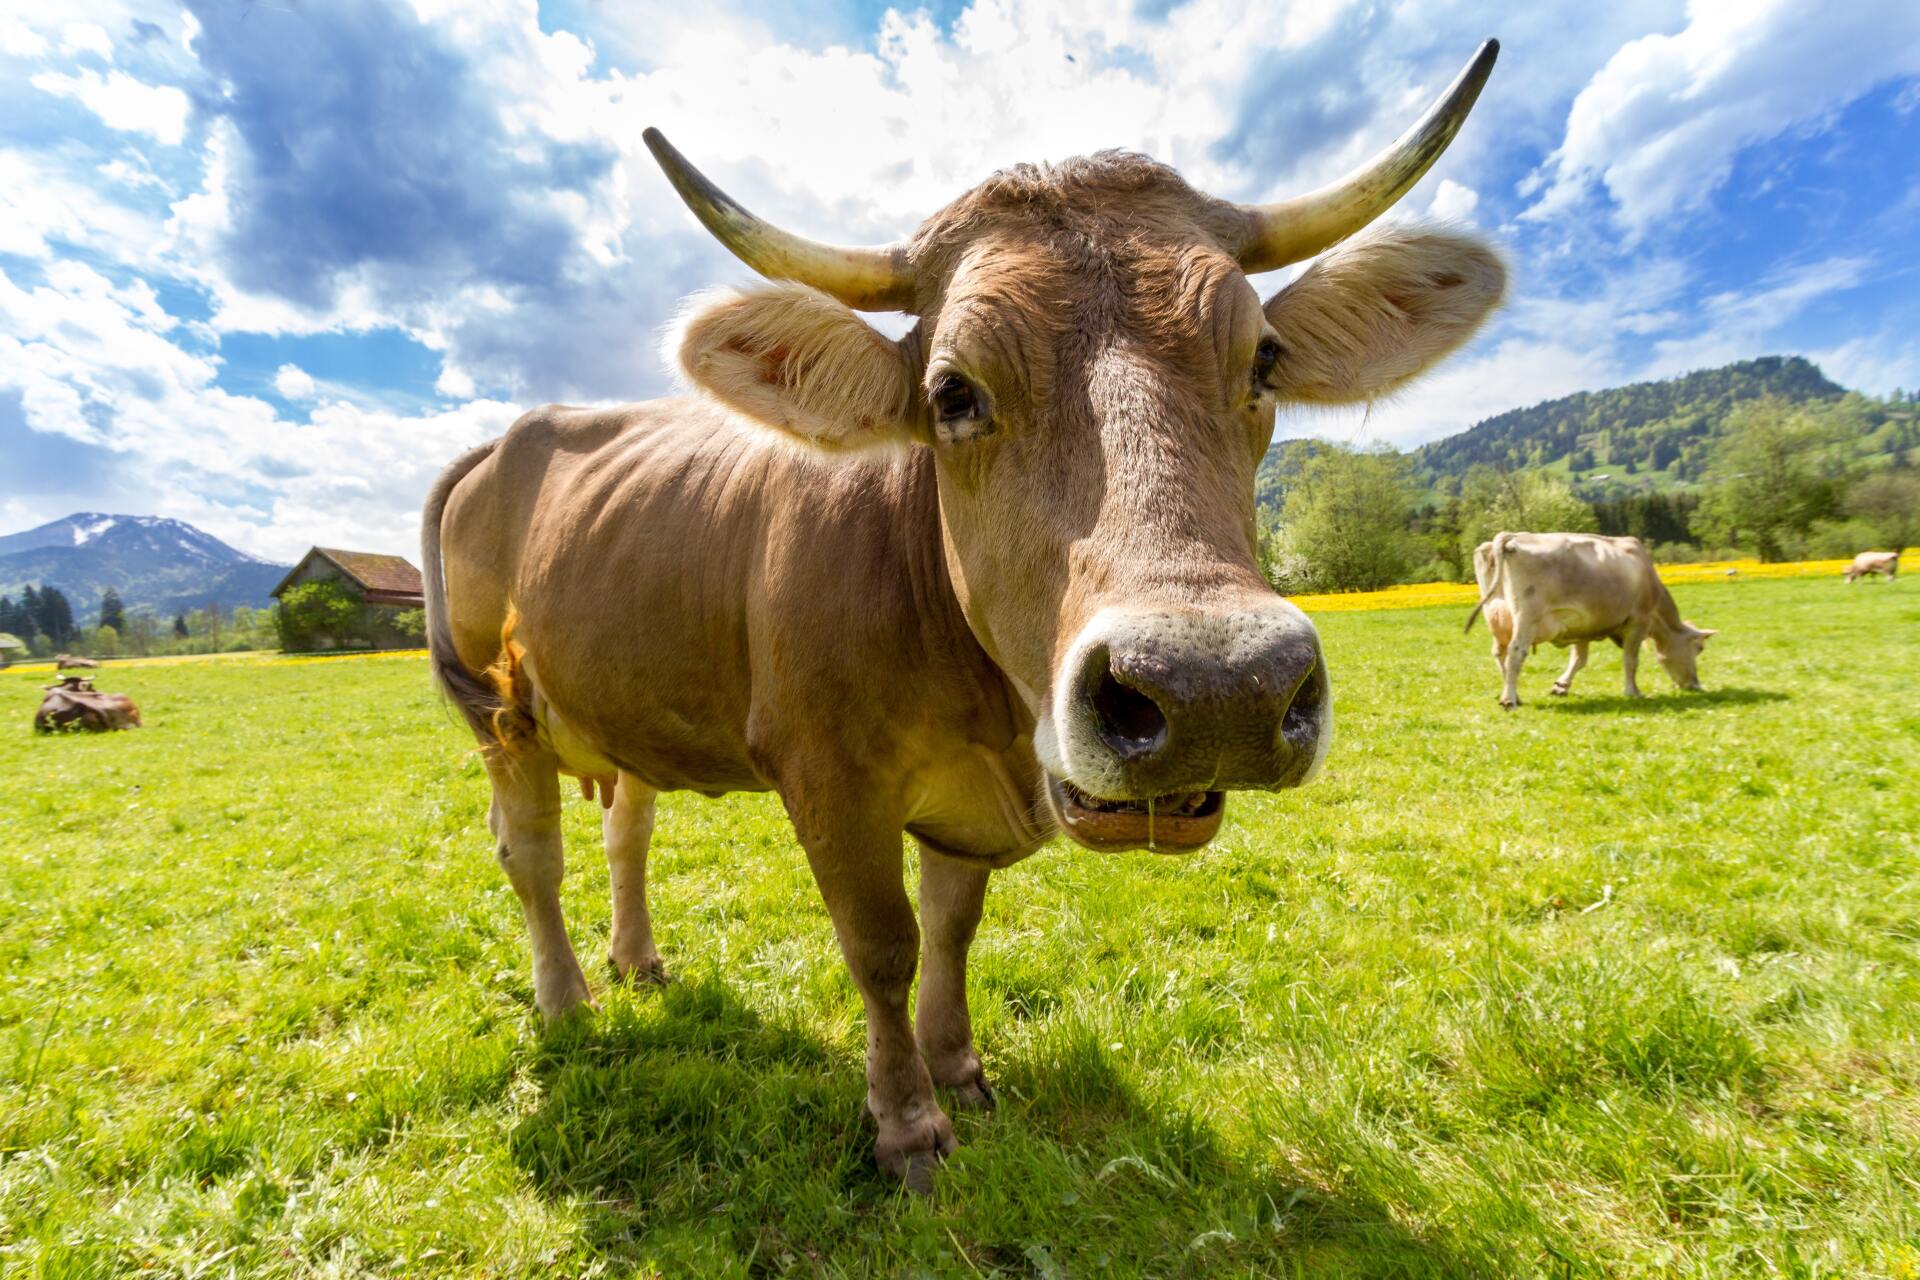 Image of a Brown Cow - image by Pixbay